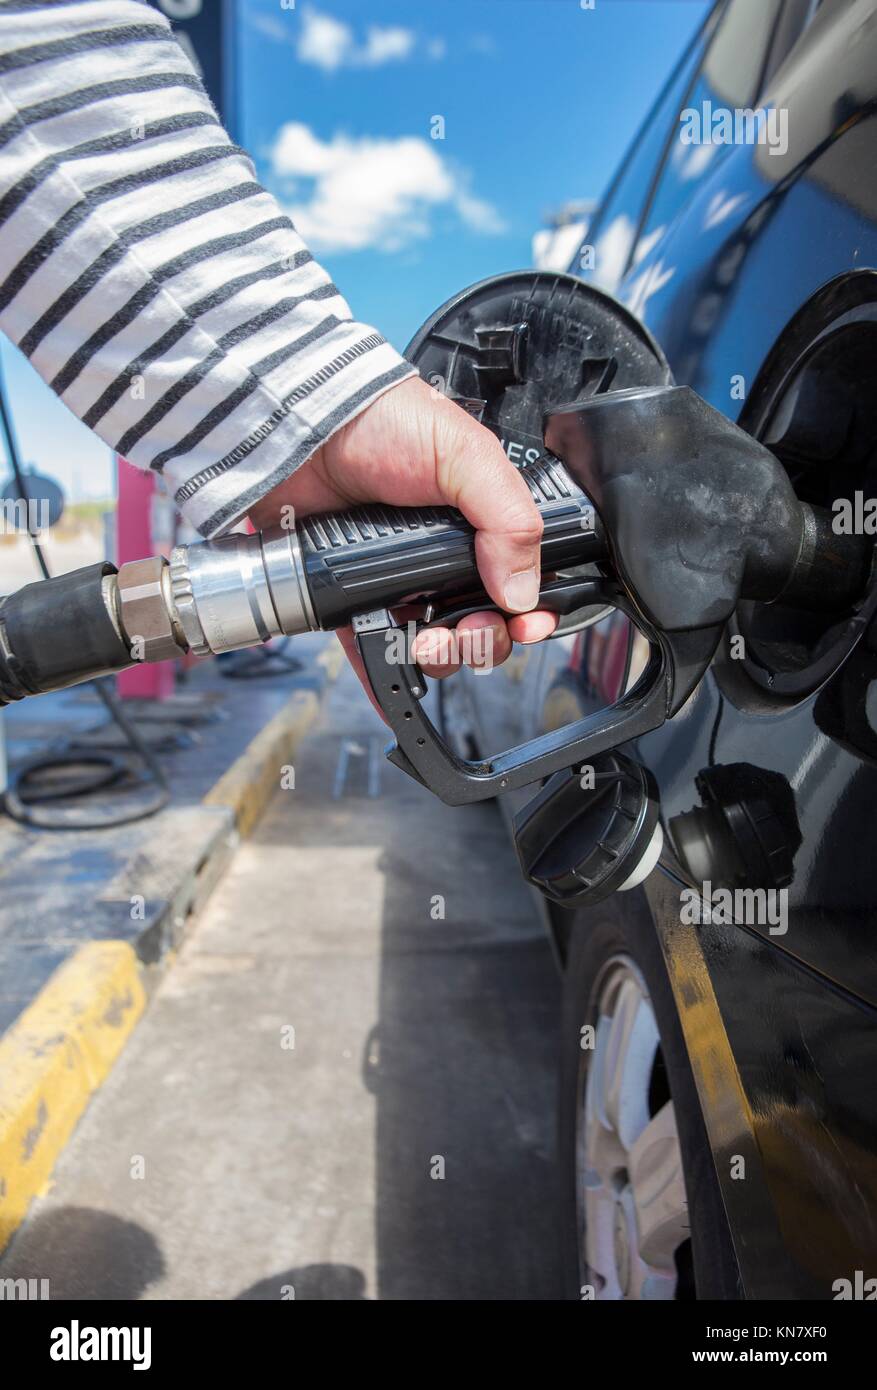 Man pumping gasoline fuel in car at gas station. Stock Photo